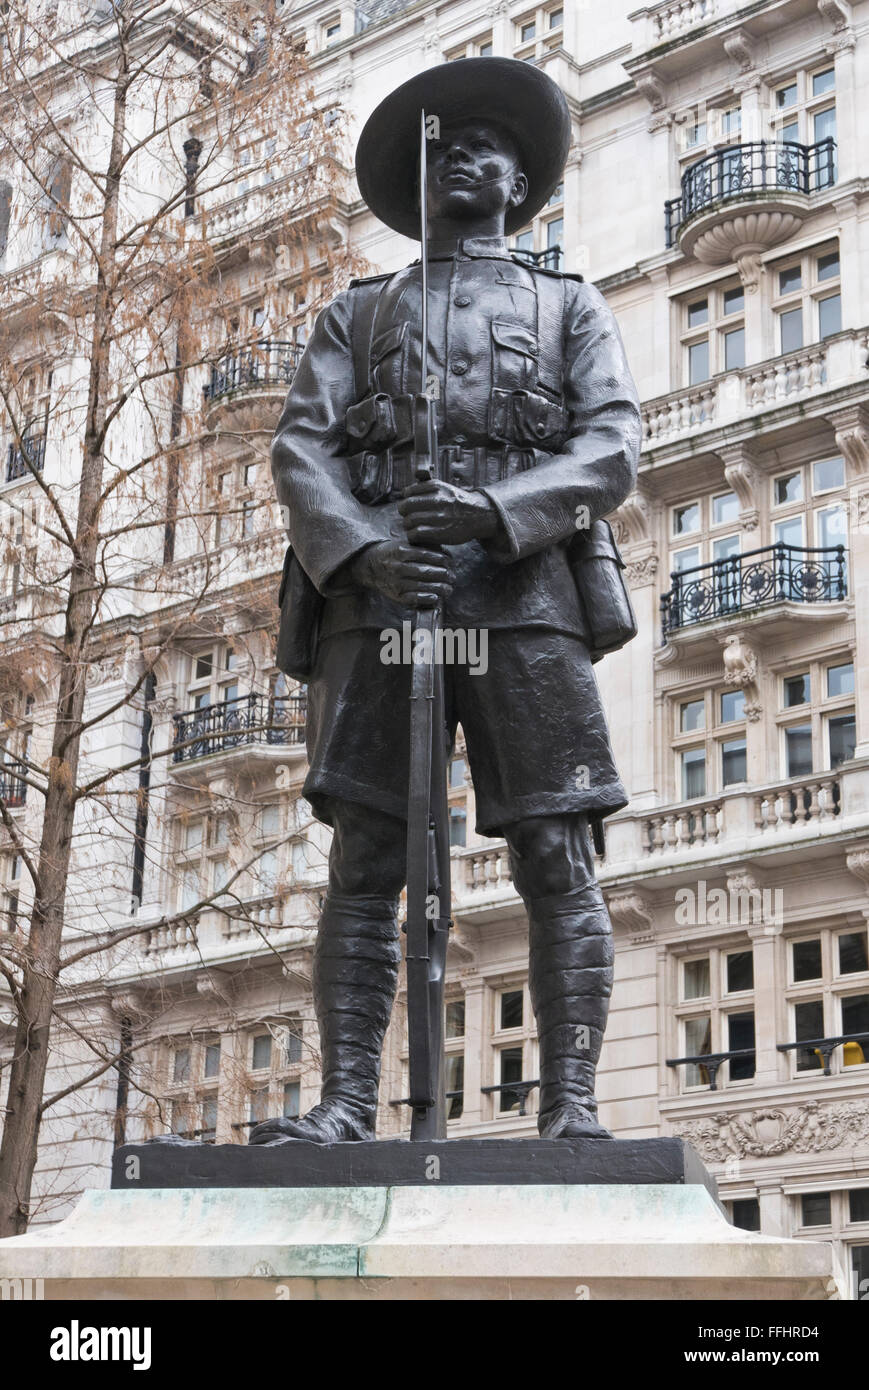 A bronze Statue of a Gurkha soldier, a Monument To The Nepalis Who Fight For The British Army, London, United Kingdom. Stock Photo